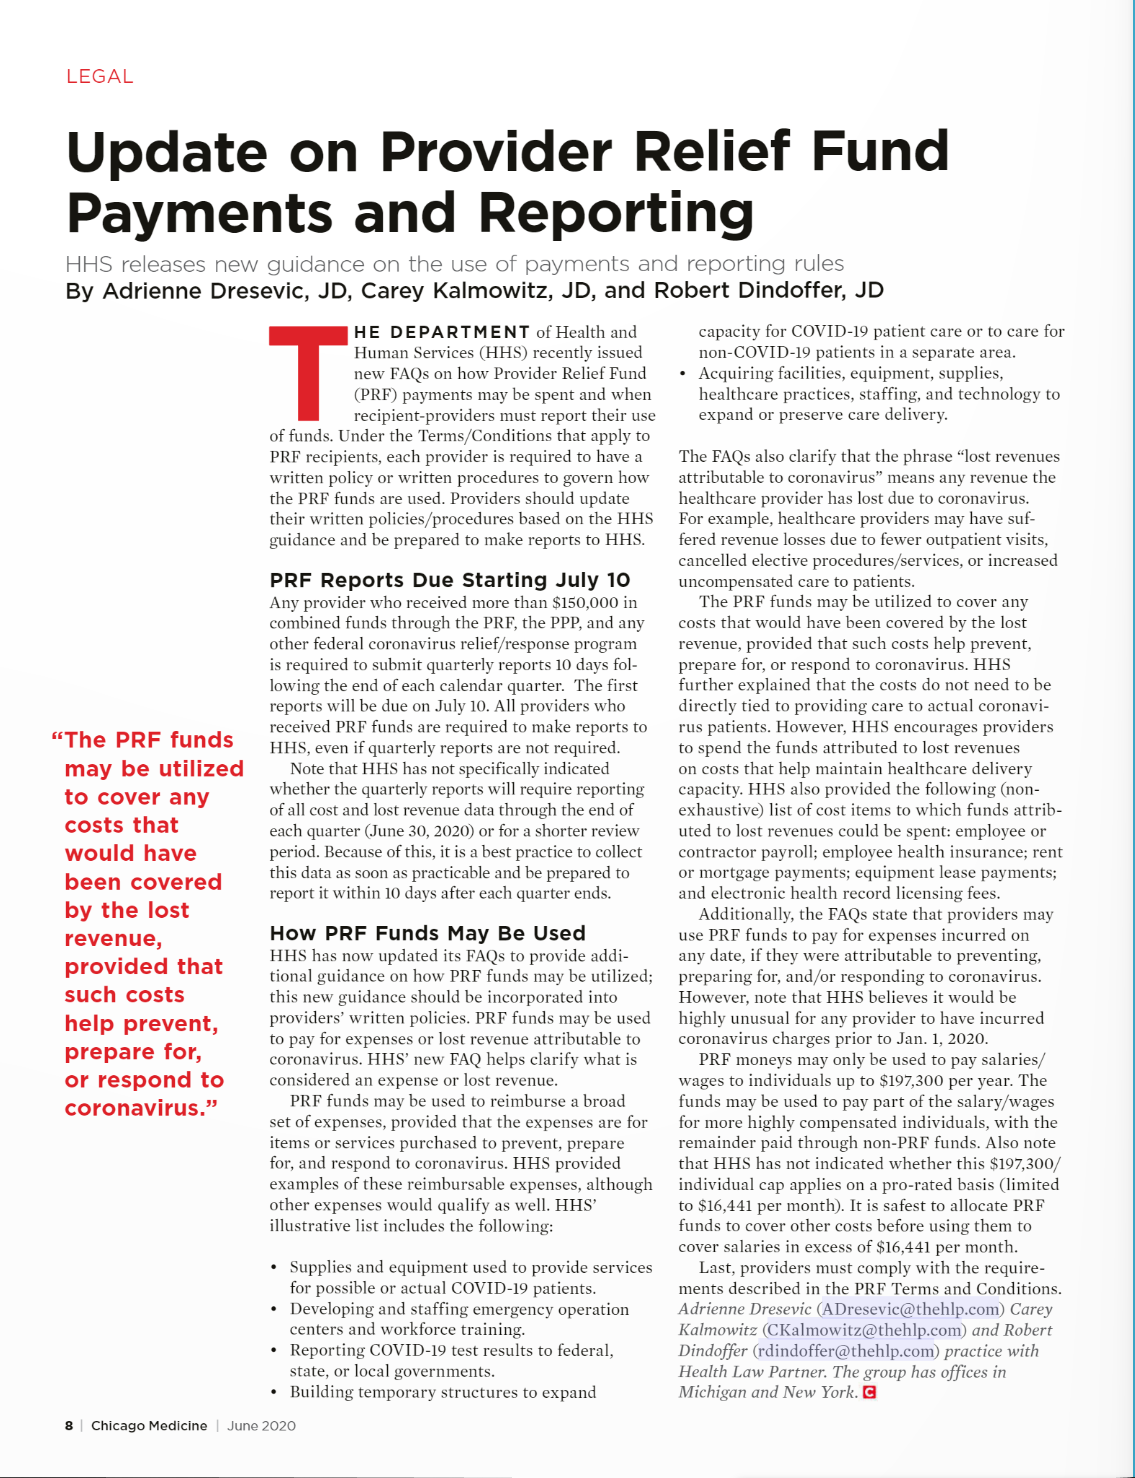 Update on Provider Relief Fund Payments and Reporting 